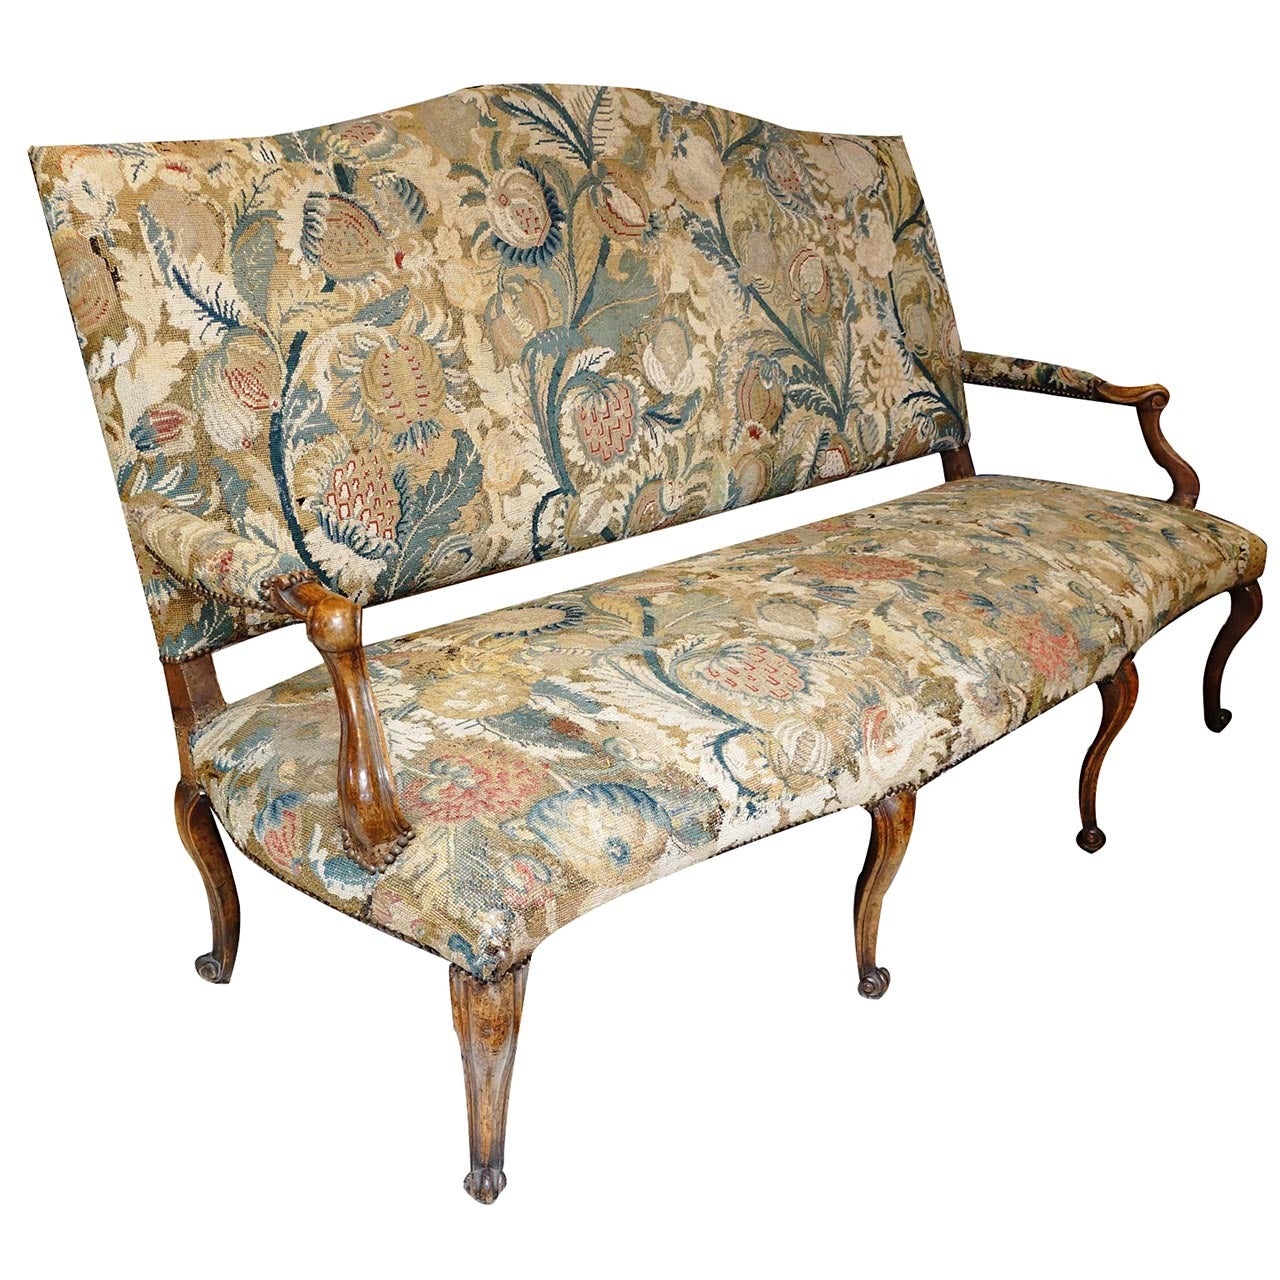 18th Century Italian Sofa with Walnut Frame and Antique Tapestry Upholstery For Sale